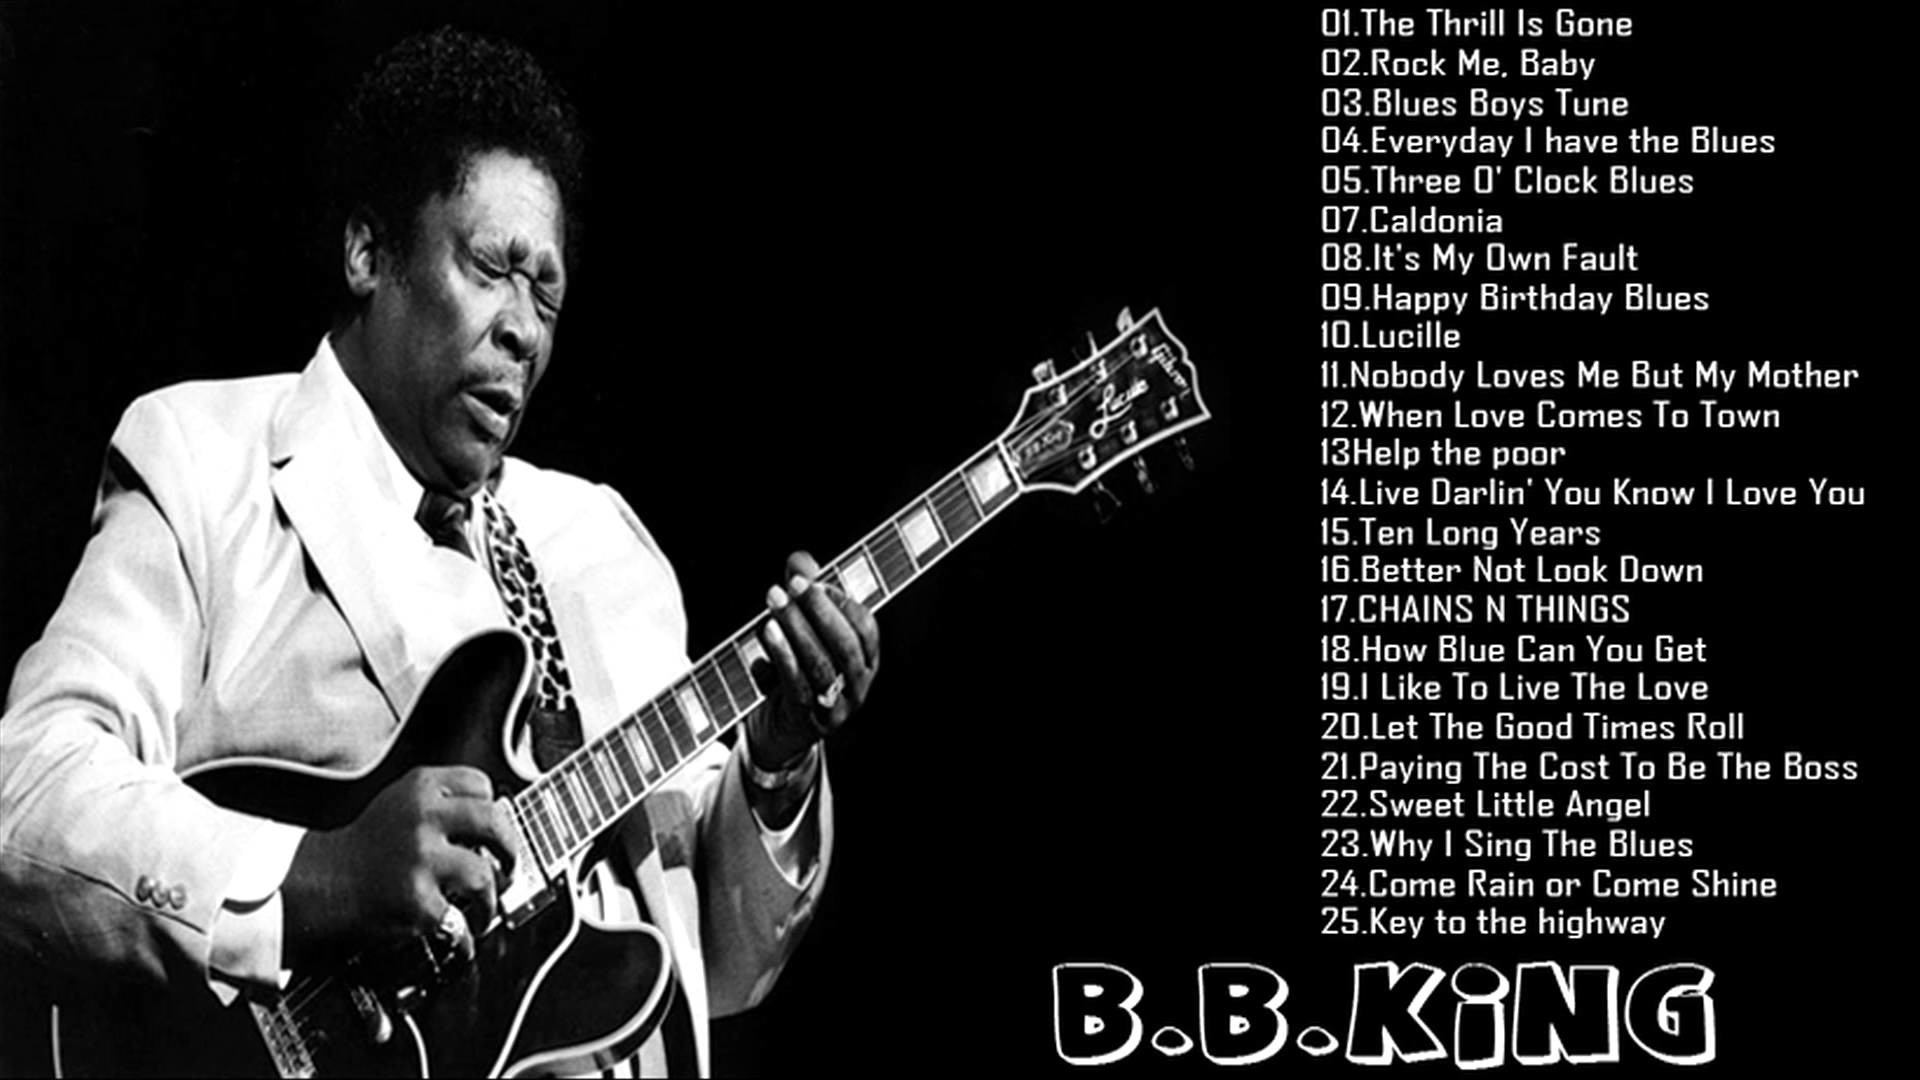 Lets go bi. Why i Sing the Blues би би Кинг. Why i Sing the Blues b.b. King. B.B. King - the Thrill is gone. The Thrill is gone би би Кинг.